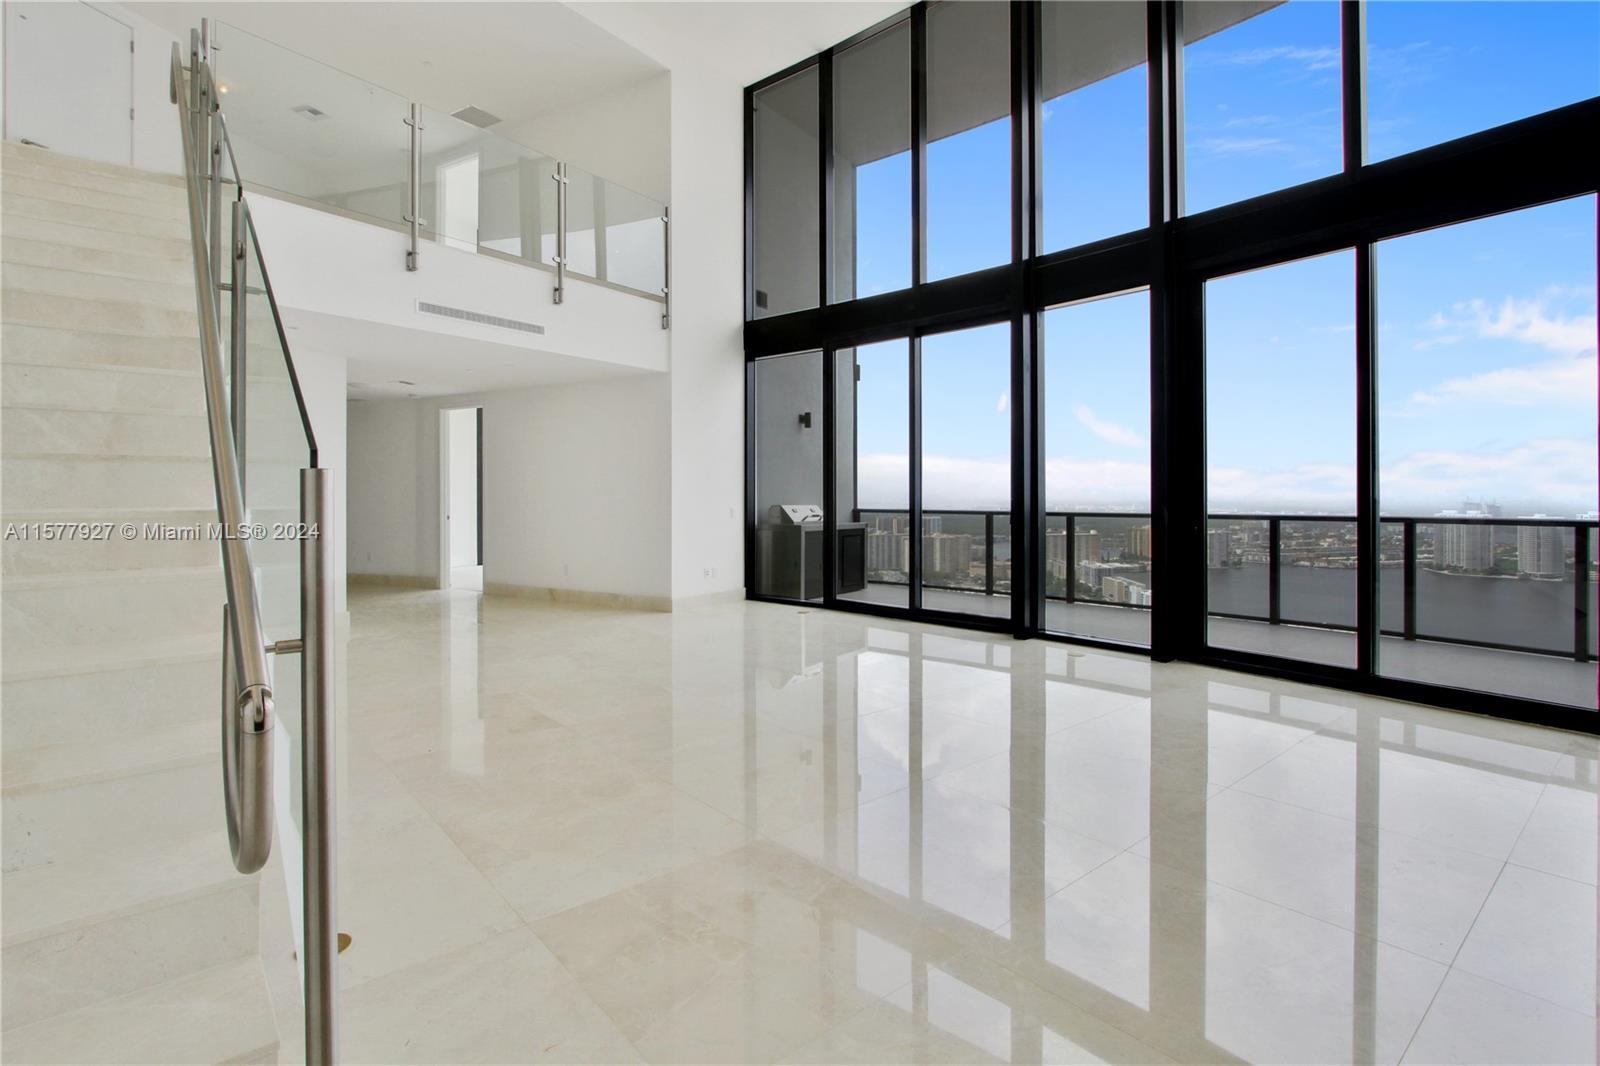 One of the few duplex residences with dramatic 22ft ceilings. Duplex are only 40th floor and up. Tak